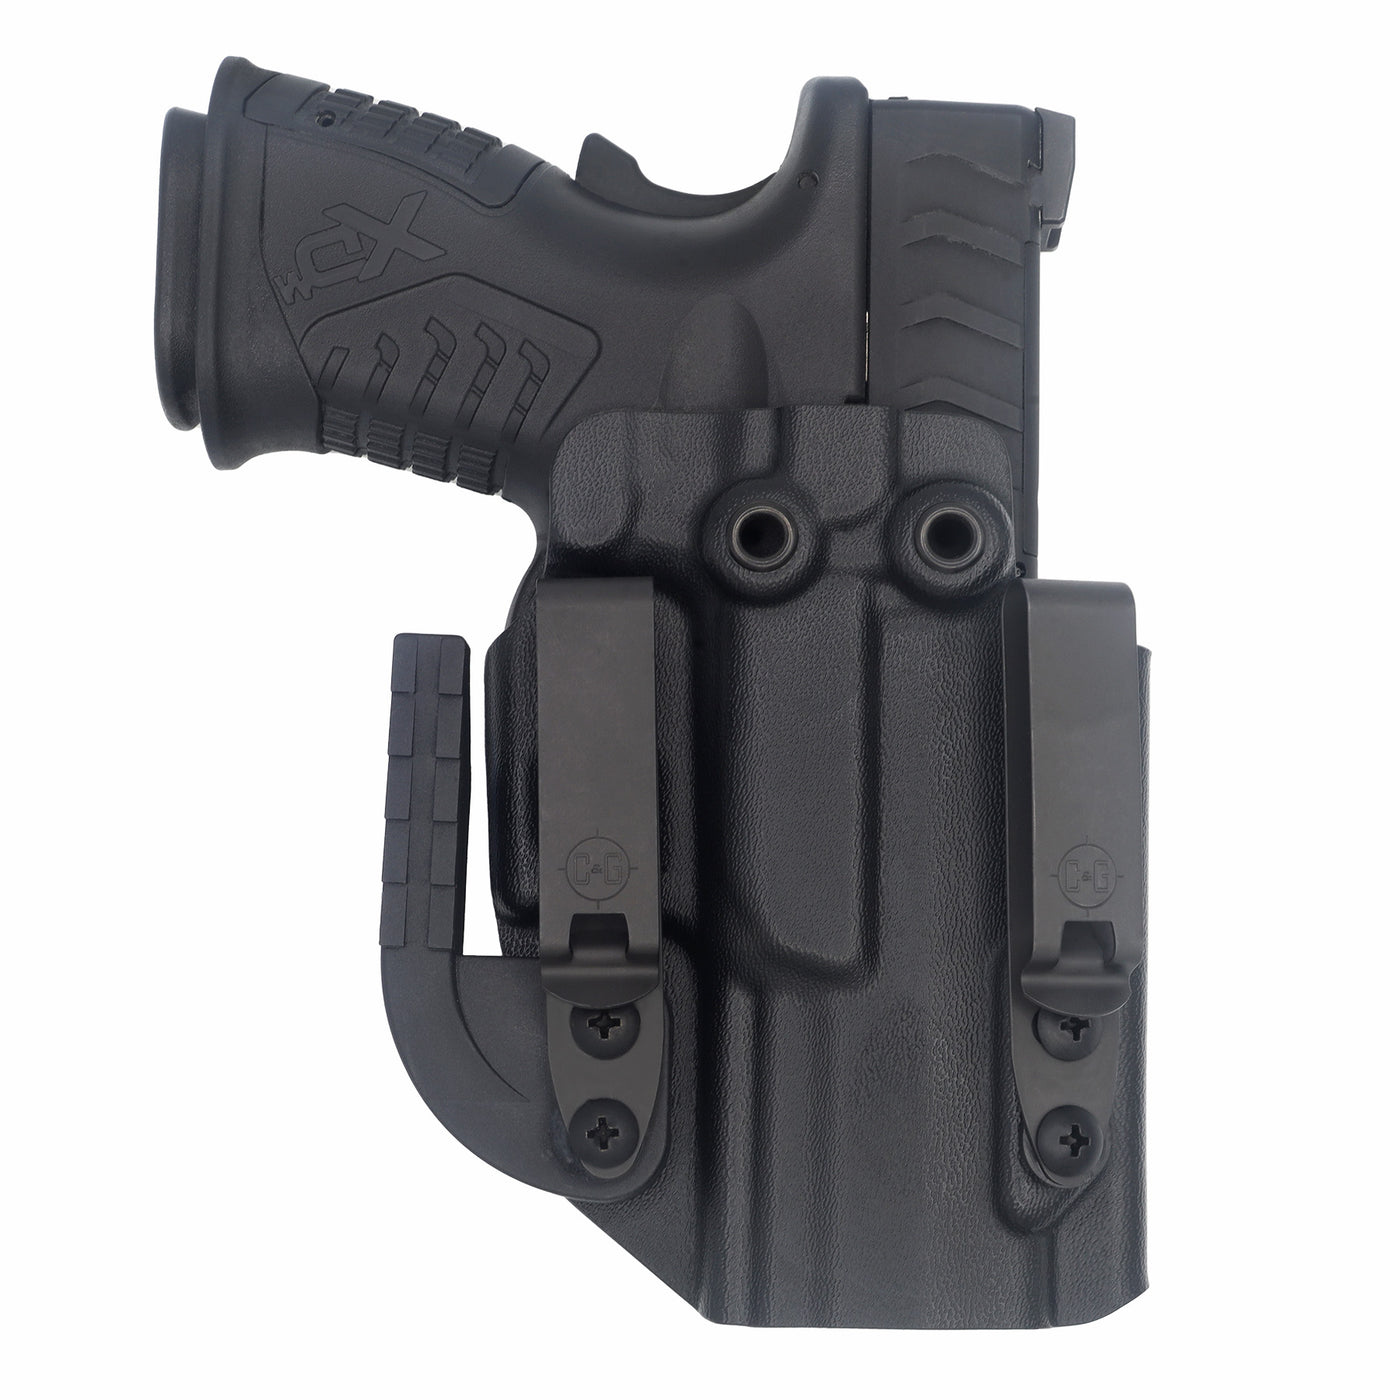 This is the Alpha upgraded quickship C&G Holsters inside the waistband holster for the Springfield XDm OSP Compact Dragonfly 3.6" with the Darkwing claw and DCC Mod4 clips.